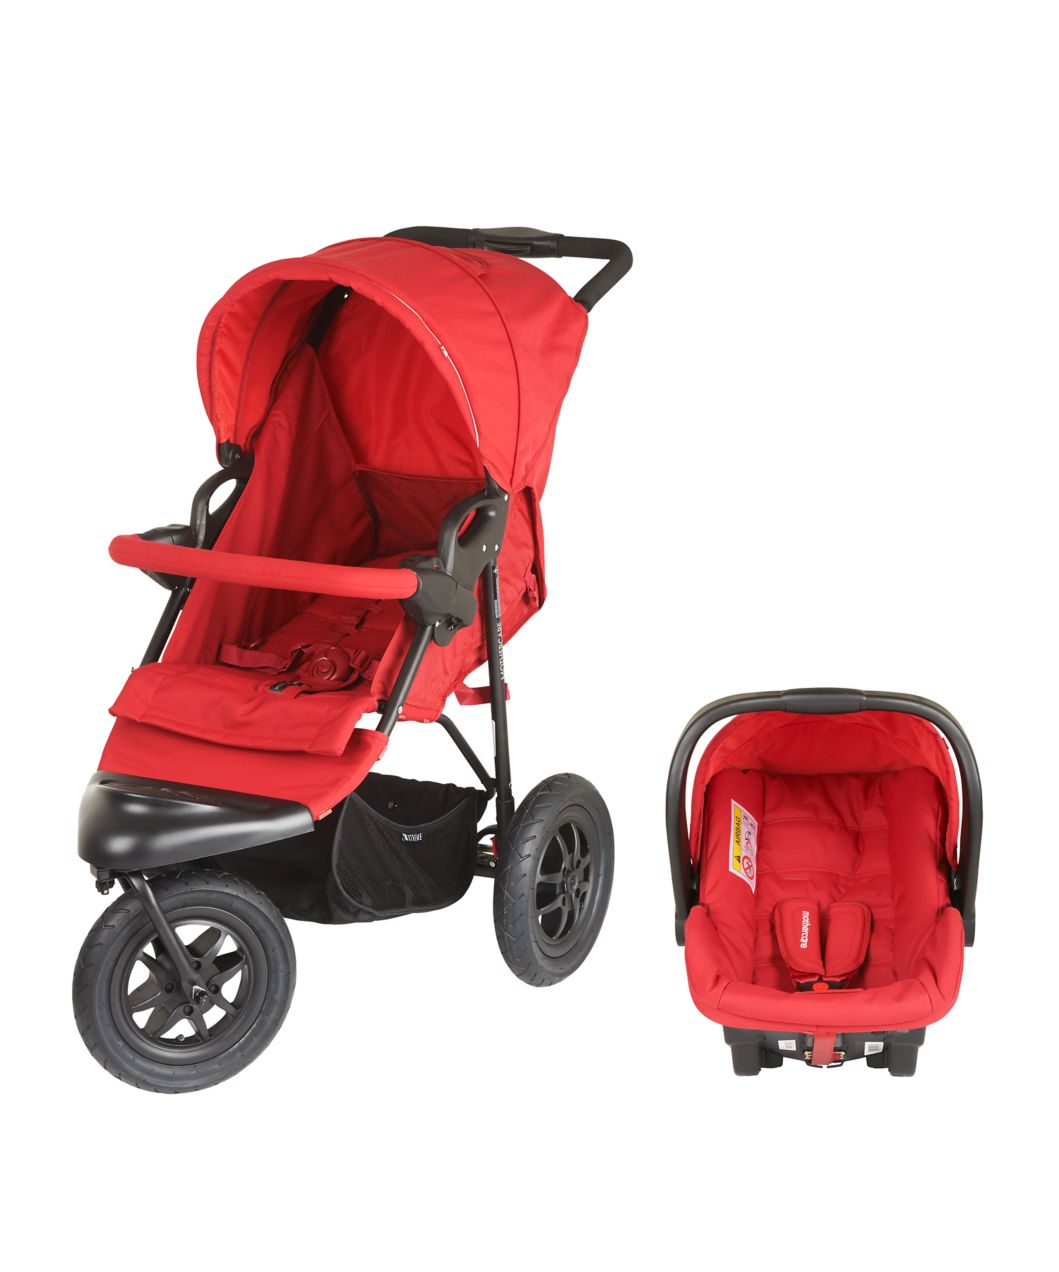 mothercare travel system uk